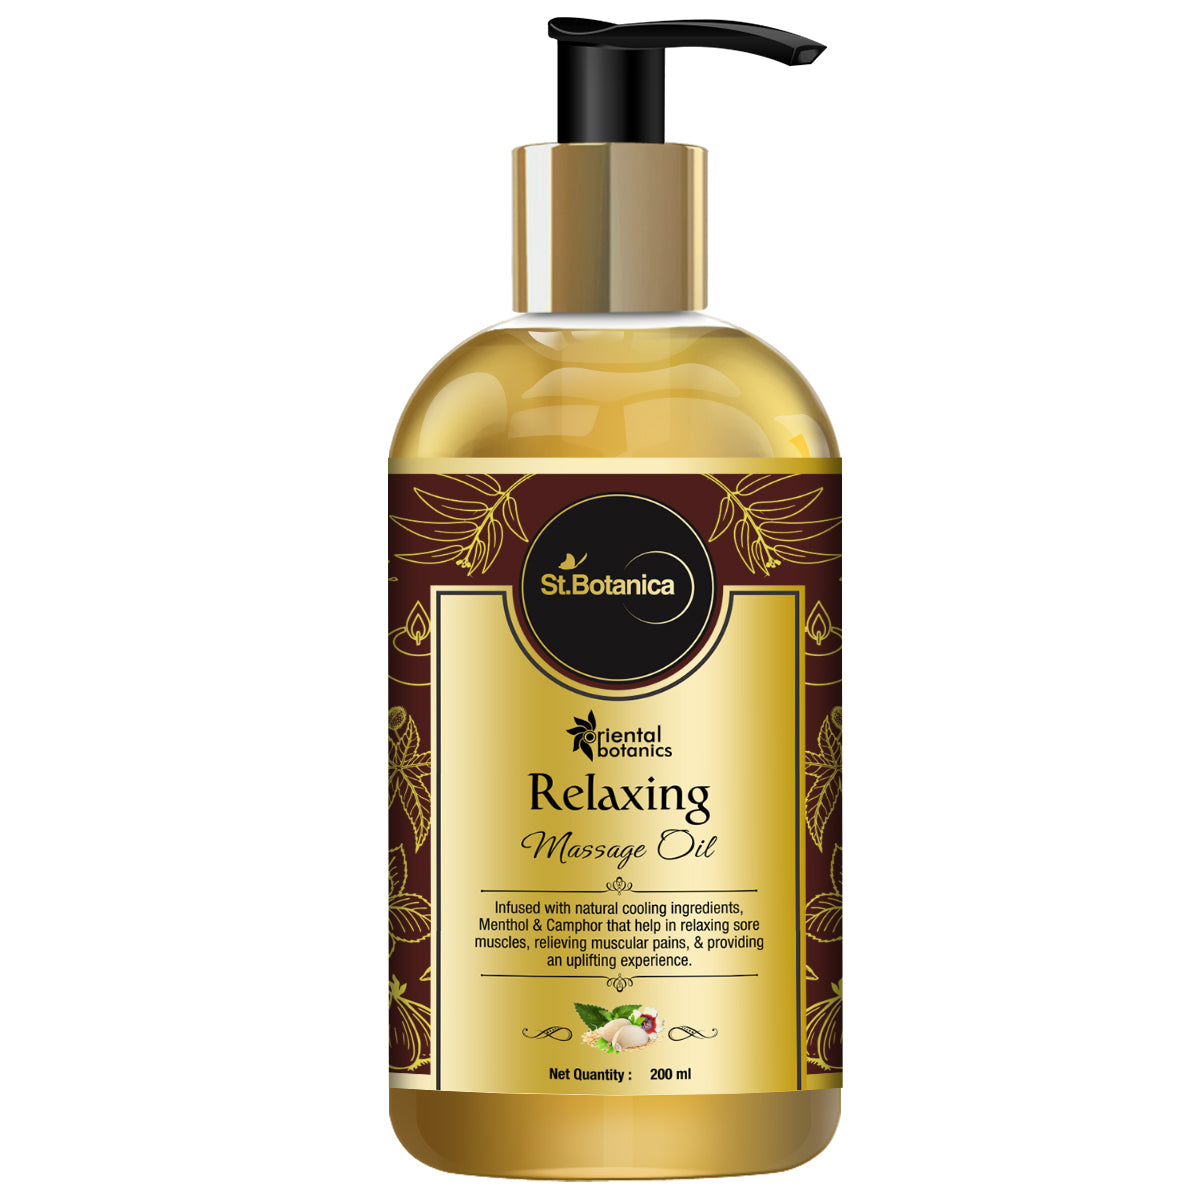 Oriental Botanics Relaxing Body Massage Oil For Pain Relief In Back, Legs, Arms, Knee, Body, 200 ml (ORBOT13)